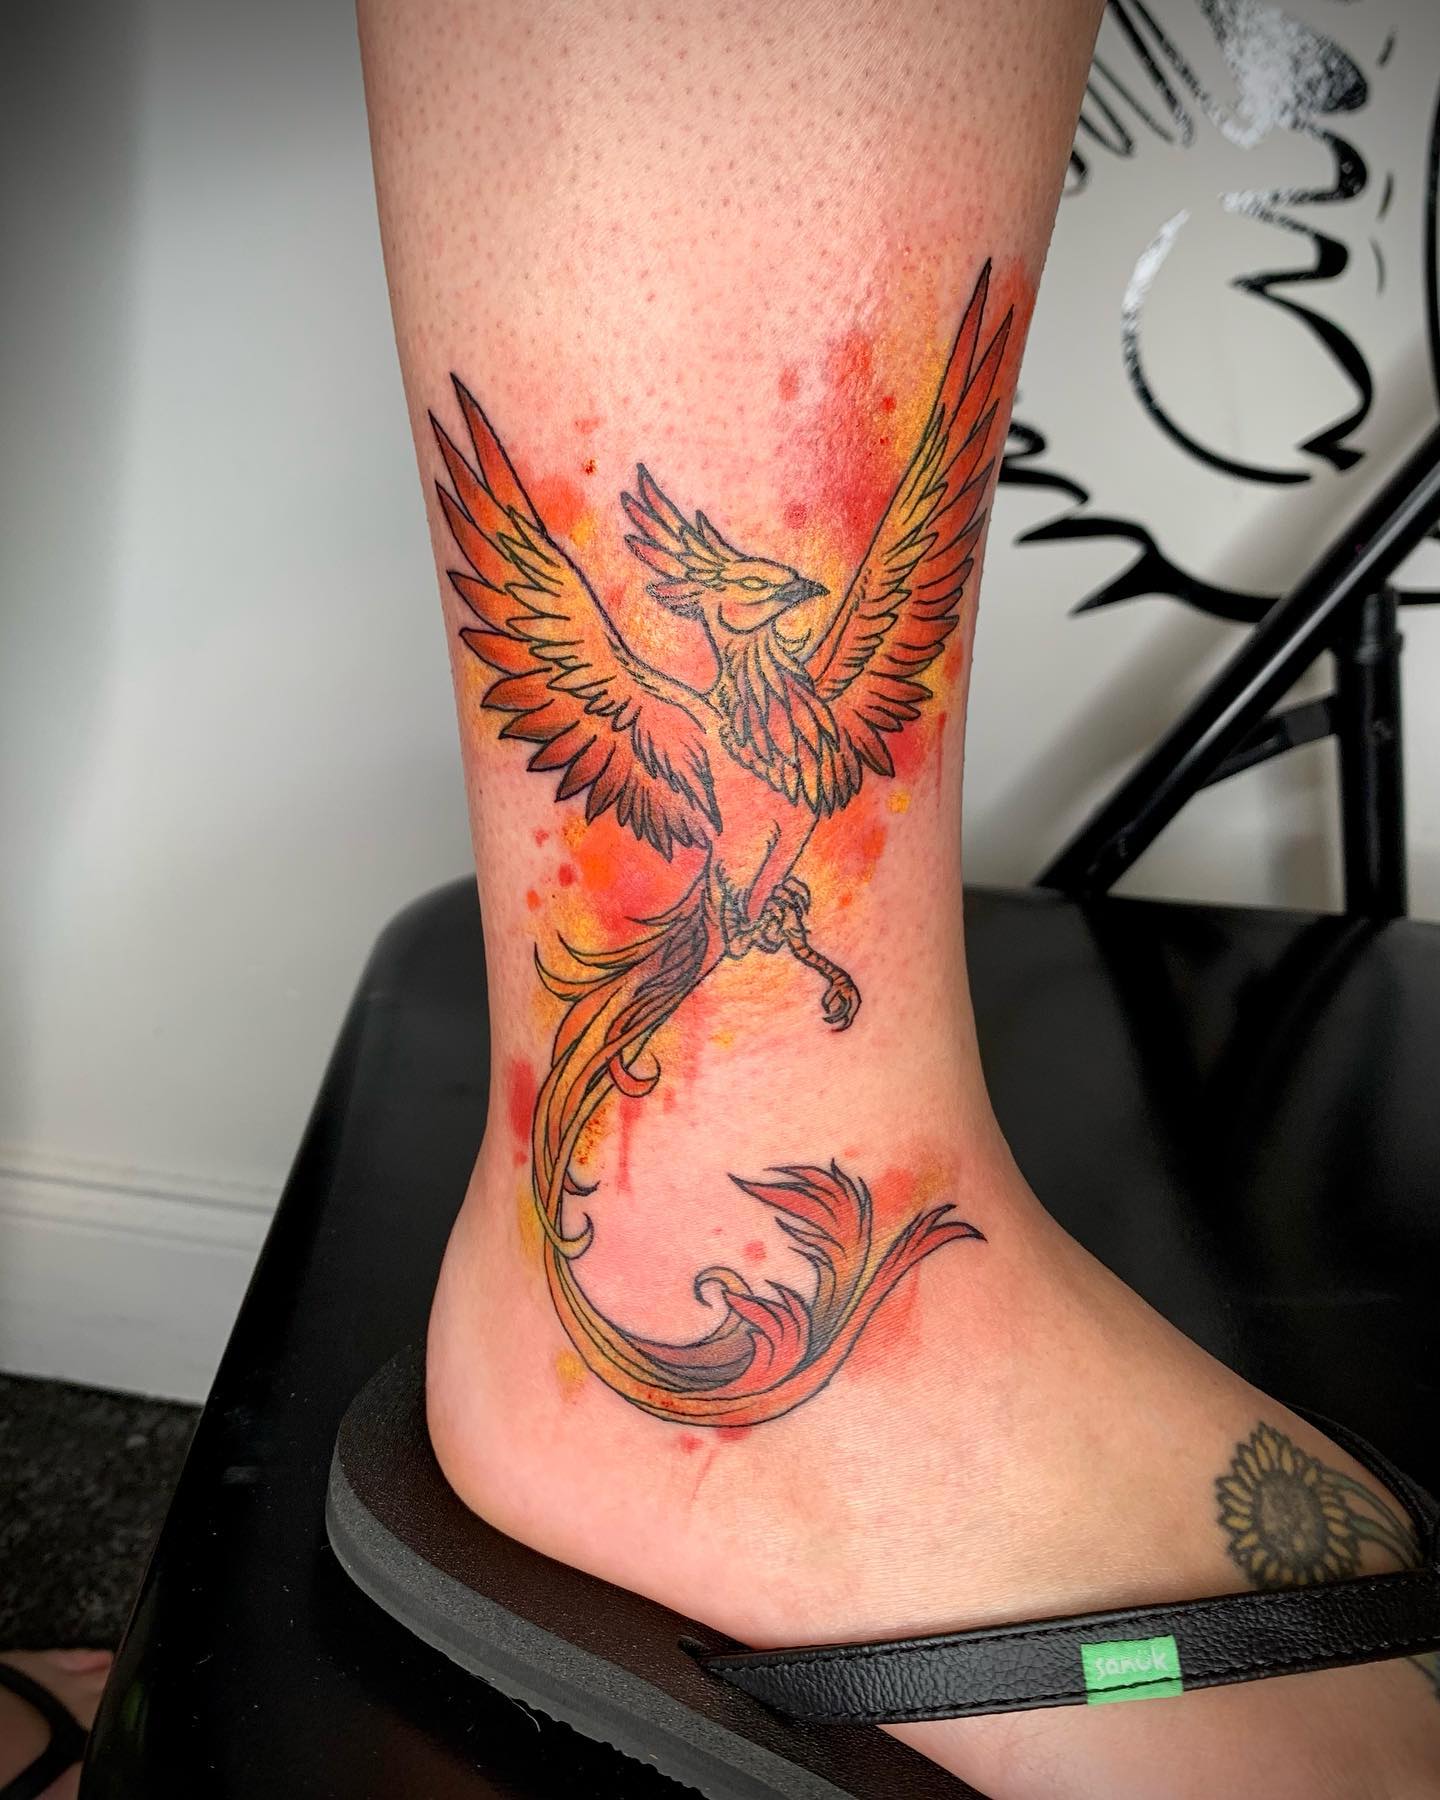 Show that you’re as powerful and as dominant with this Phoenix tattoo. Women can embrace their new life and should try out any path they fancy. In the end, a Phoenix will symbolize your new time and opportunities that are ahead.